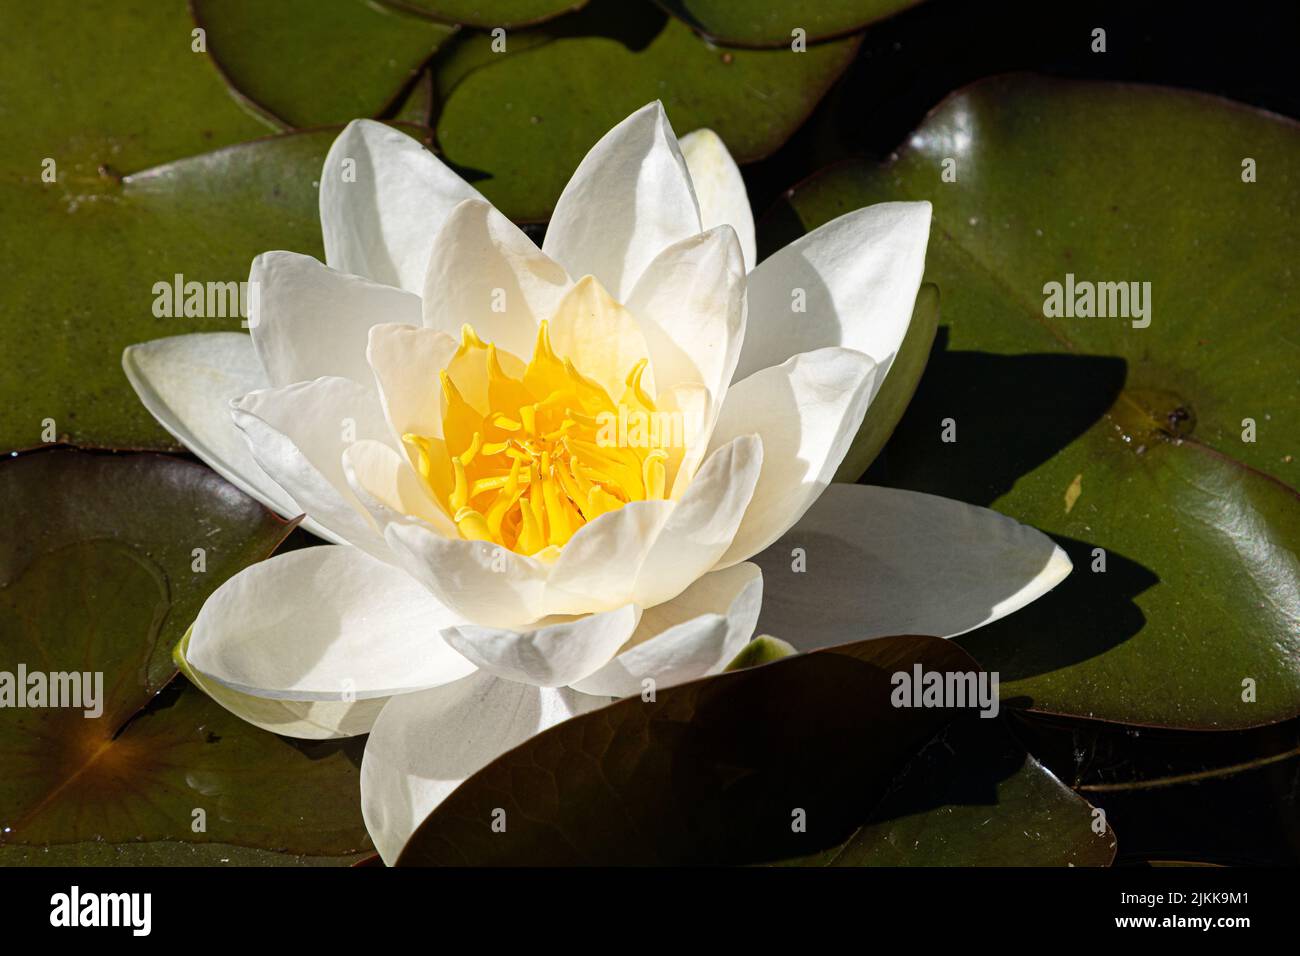 A beautiful lotus flower on a Lily pads in a lake Stock Photo